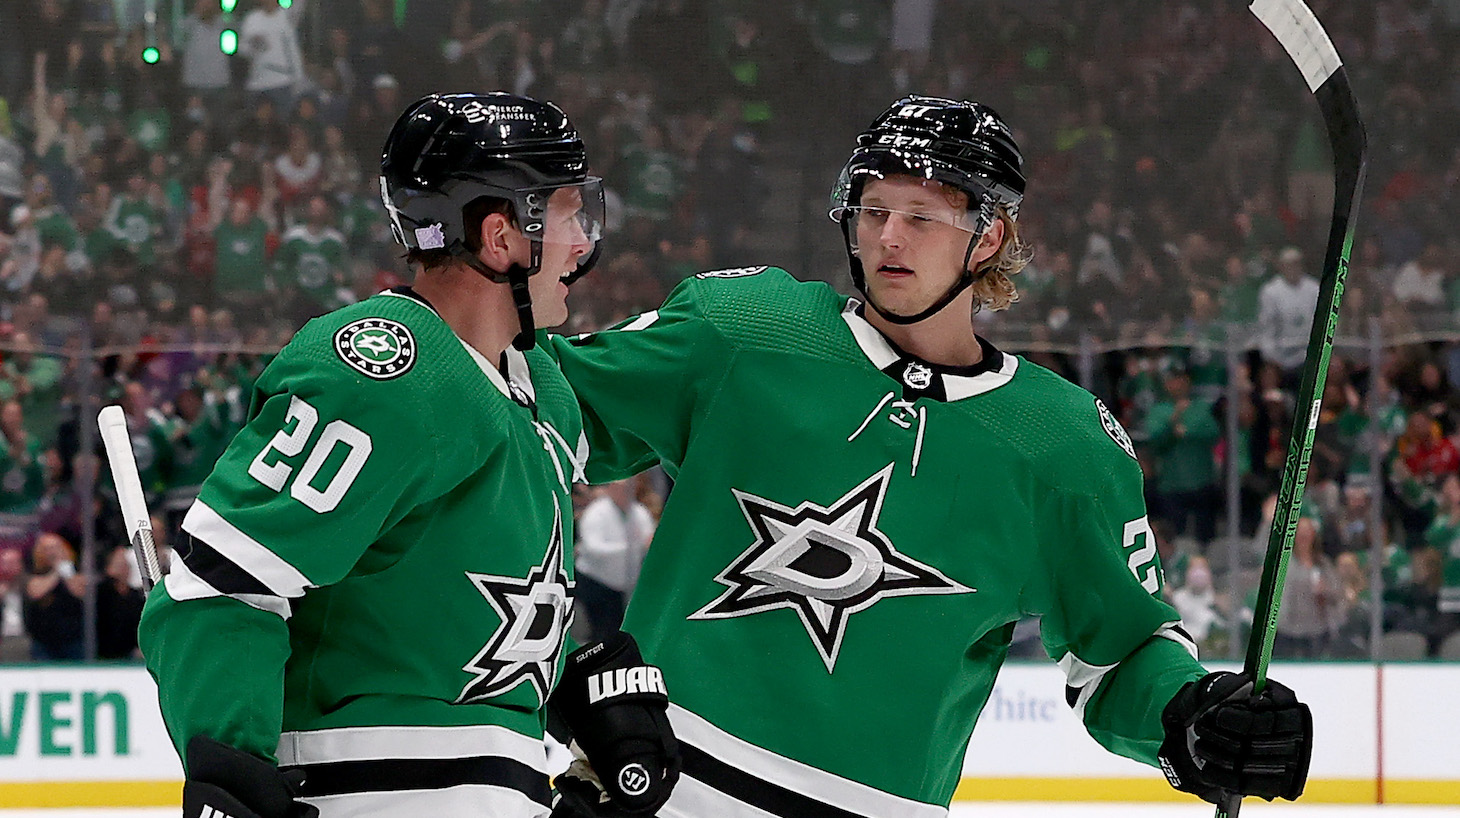 DALLAS, TEXAS - NOVEMBER 16: Ryan Suter #20 of the Dallas Stars celebrates with Riley Tufte #27 of the Dallas Stars after scoring a goal against the Detroit Red Wings in the first period at American Airlines Center on November 16, 2021 in Dallas, Texas. (Photo by Tom Pennington/Getty Images)